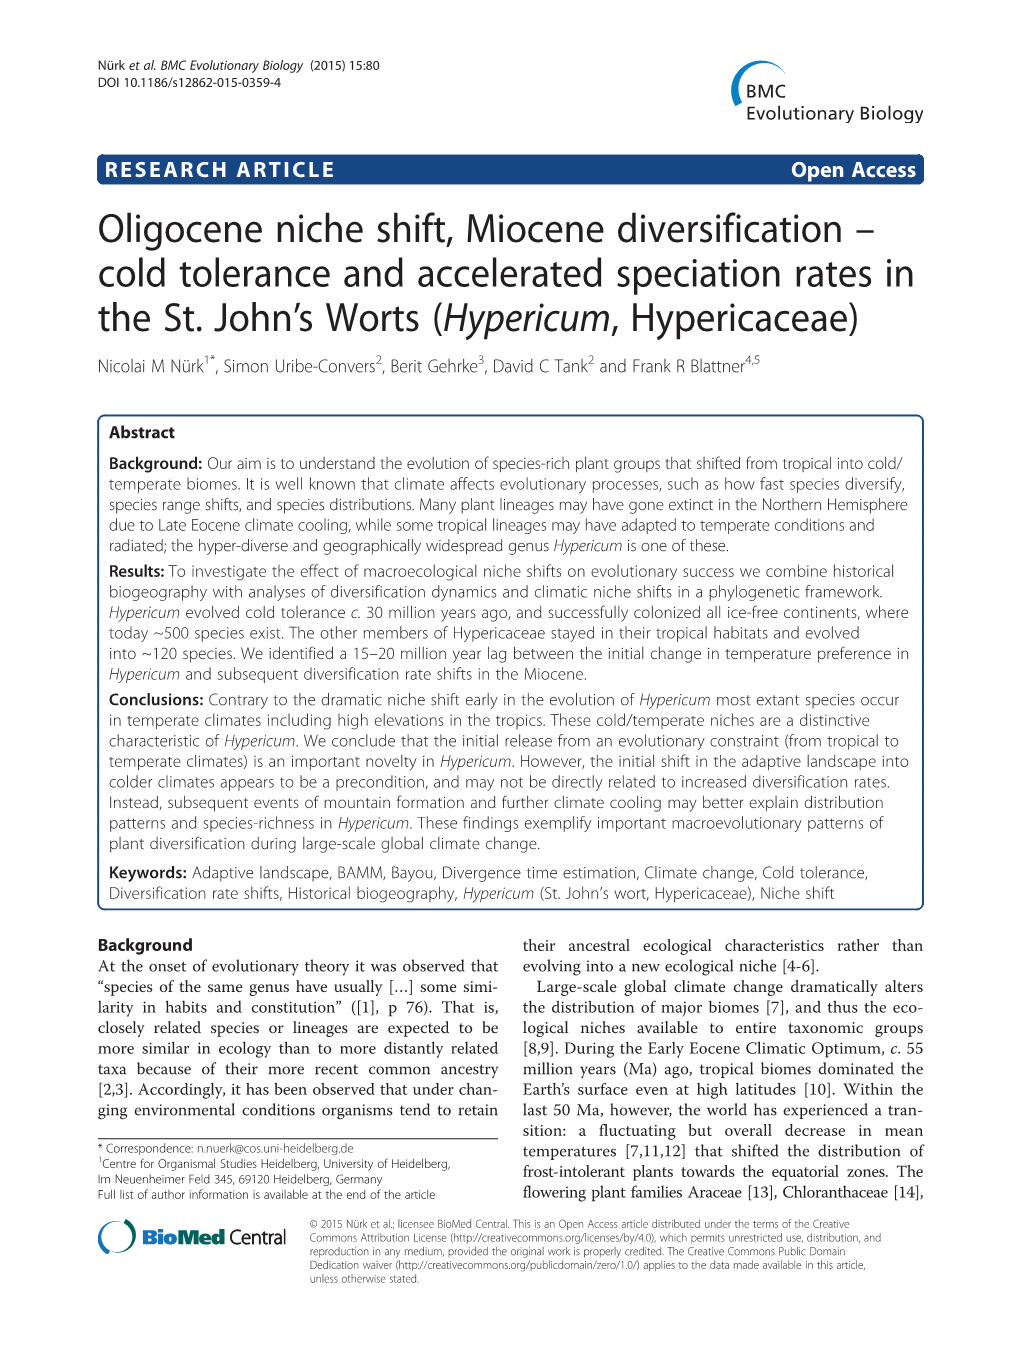 Oligocene Niche Shift, Miocene Diversification – Cold Tolerance and Accelerated Speciation Rates in the St